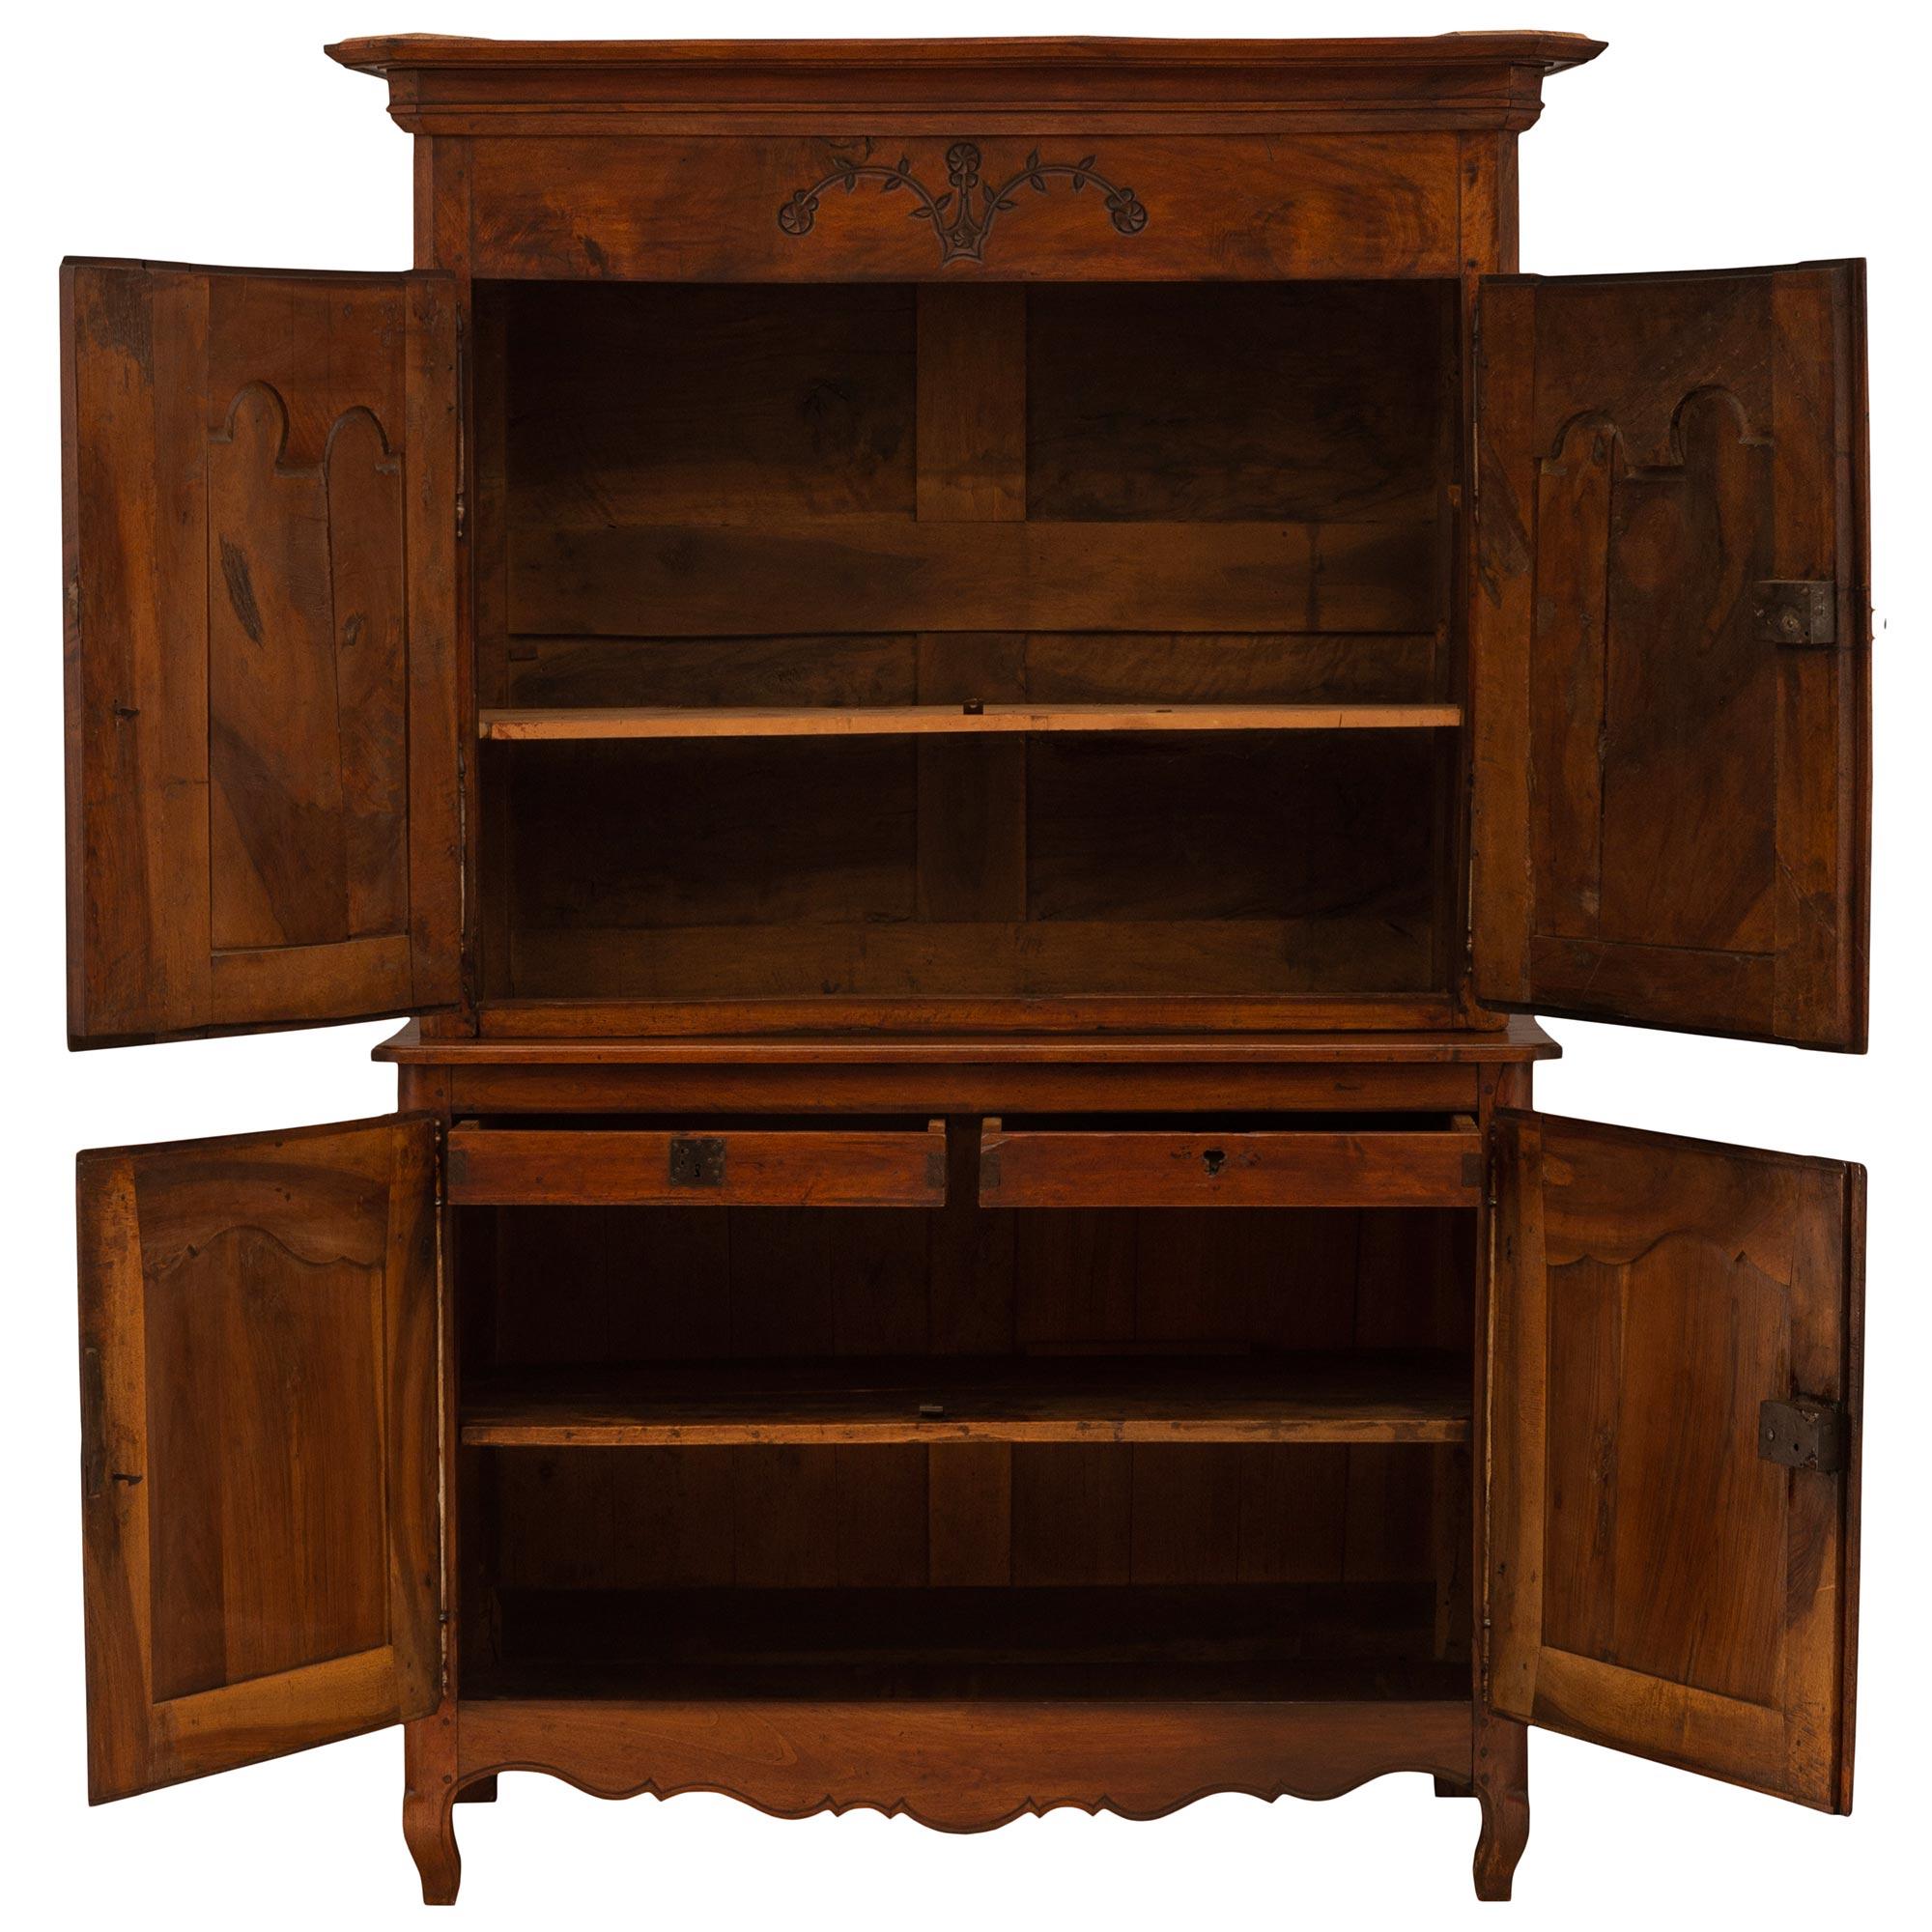 A fine French 18th century Louis XV period walnut 'Deux Corps', mounted with all of its original hardware. The bottom is raised by cabriole legs and has two doors above a scalloped apron. Inside lays the original shelf below two inside drawers.